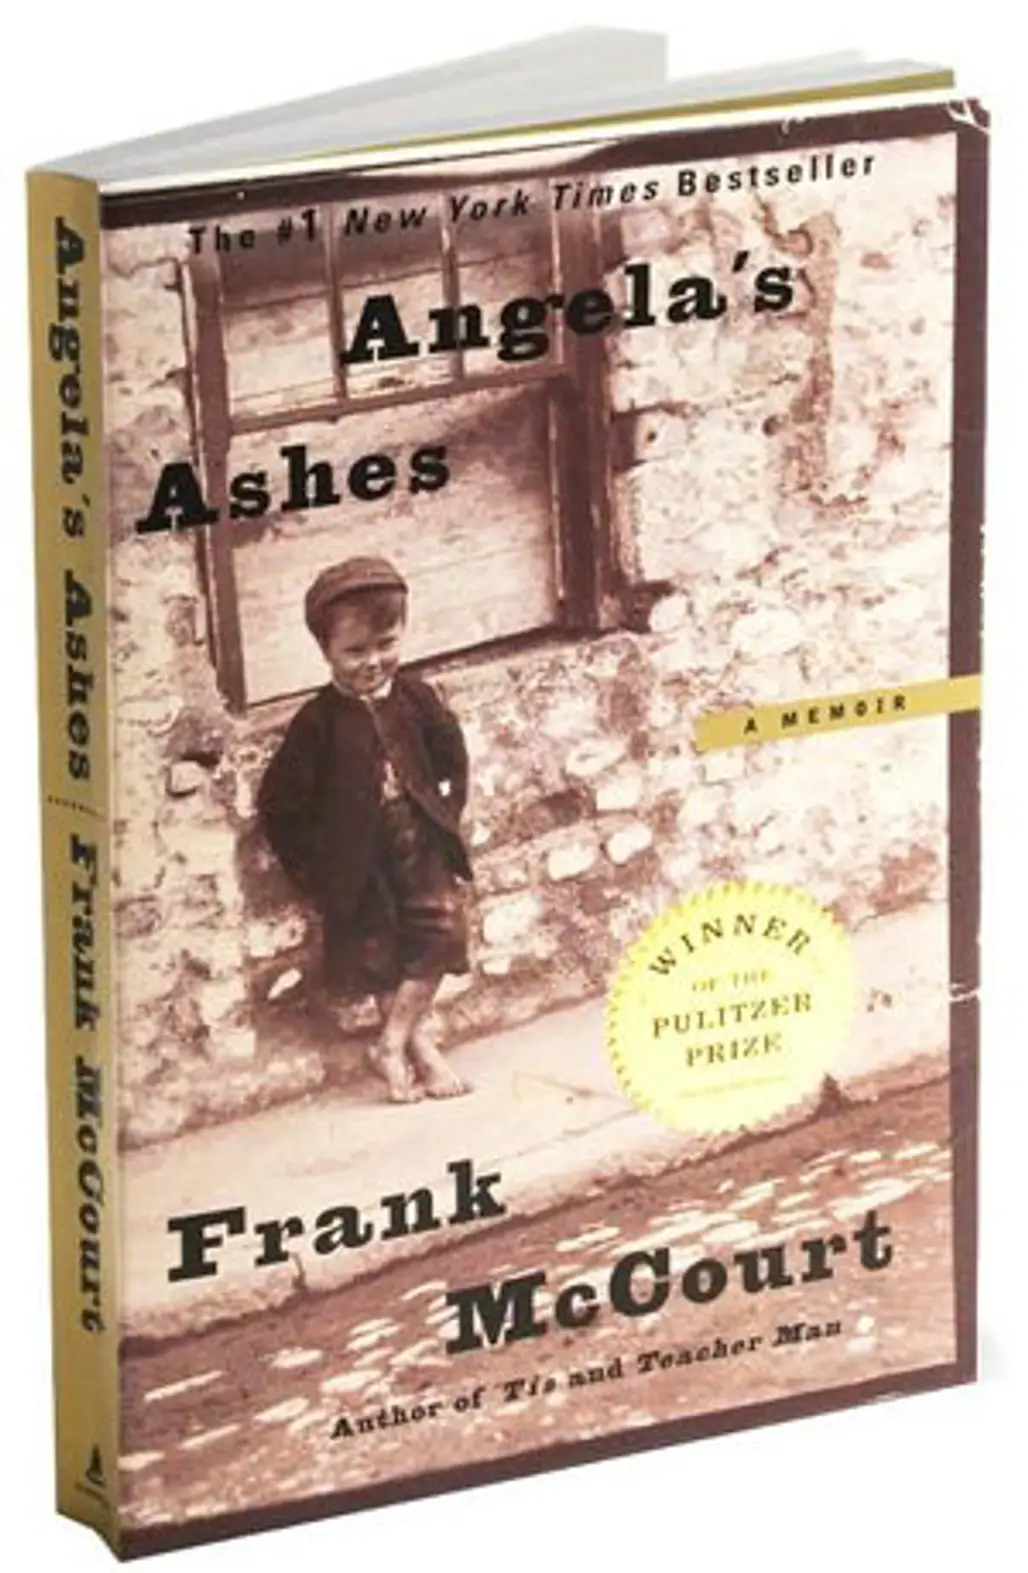 “Angela’s Ashes” by Frank McCourt